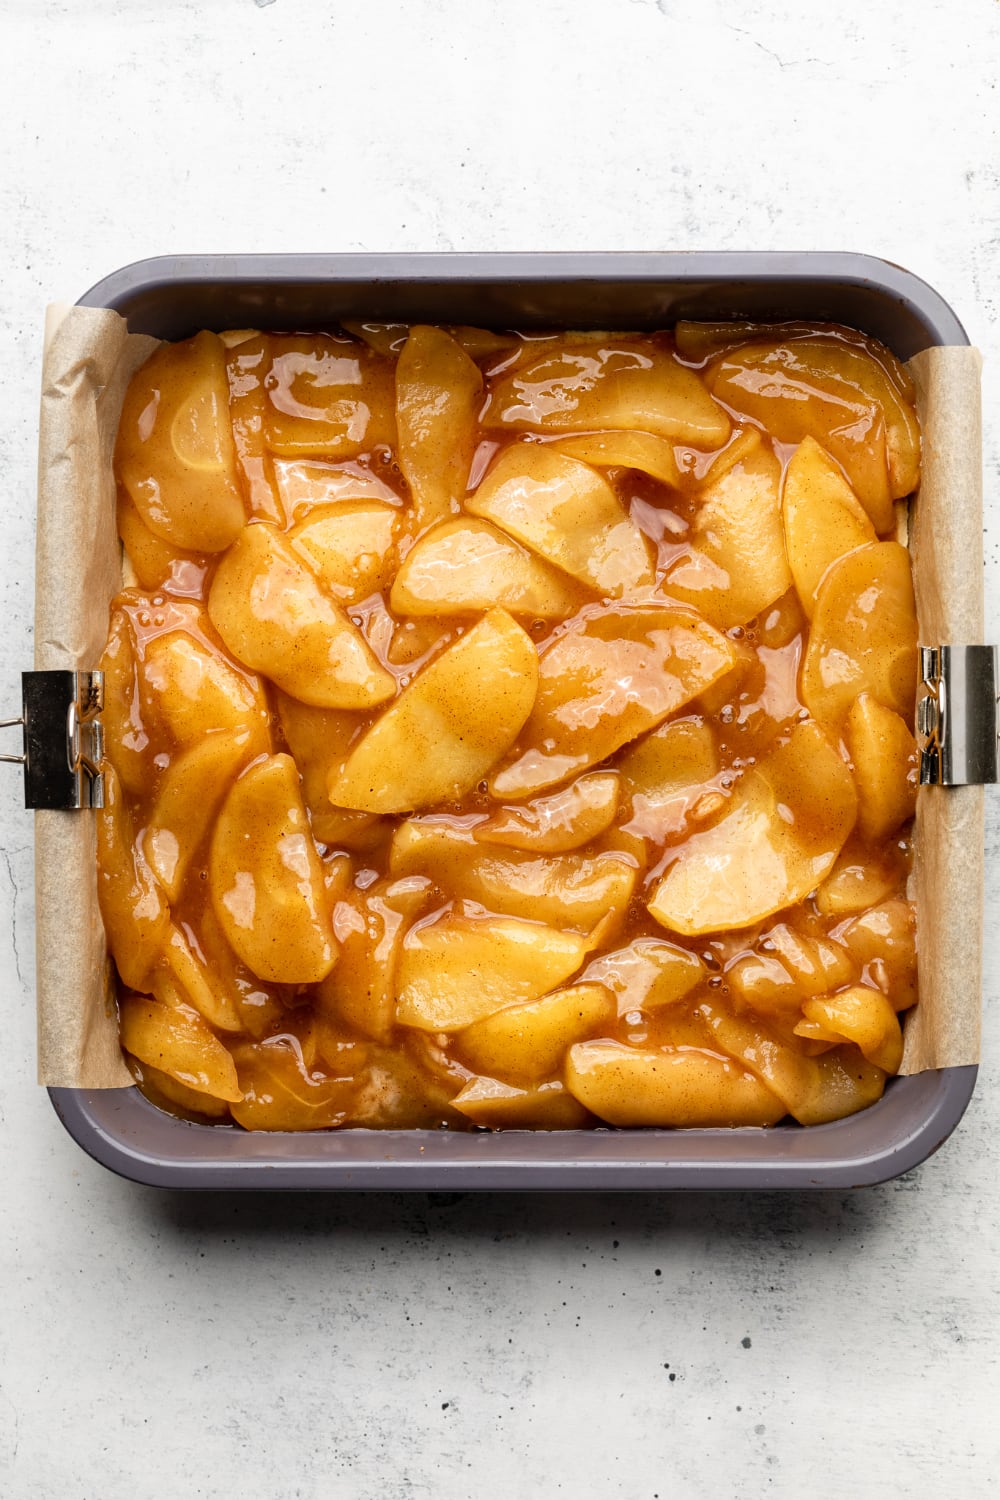 baked apples in the pan